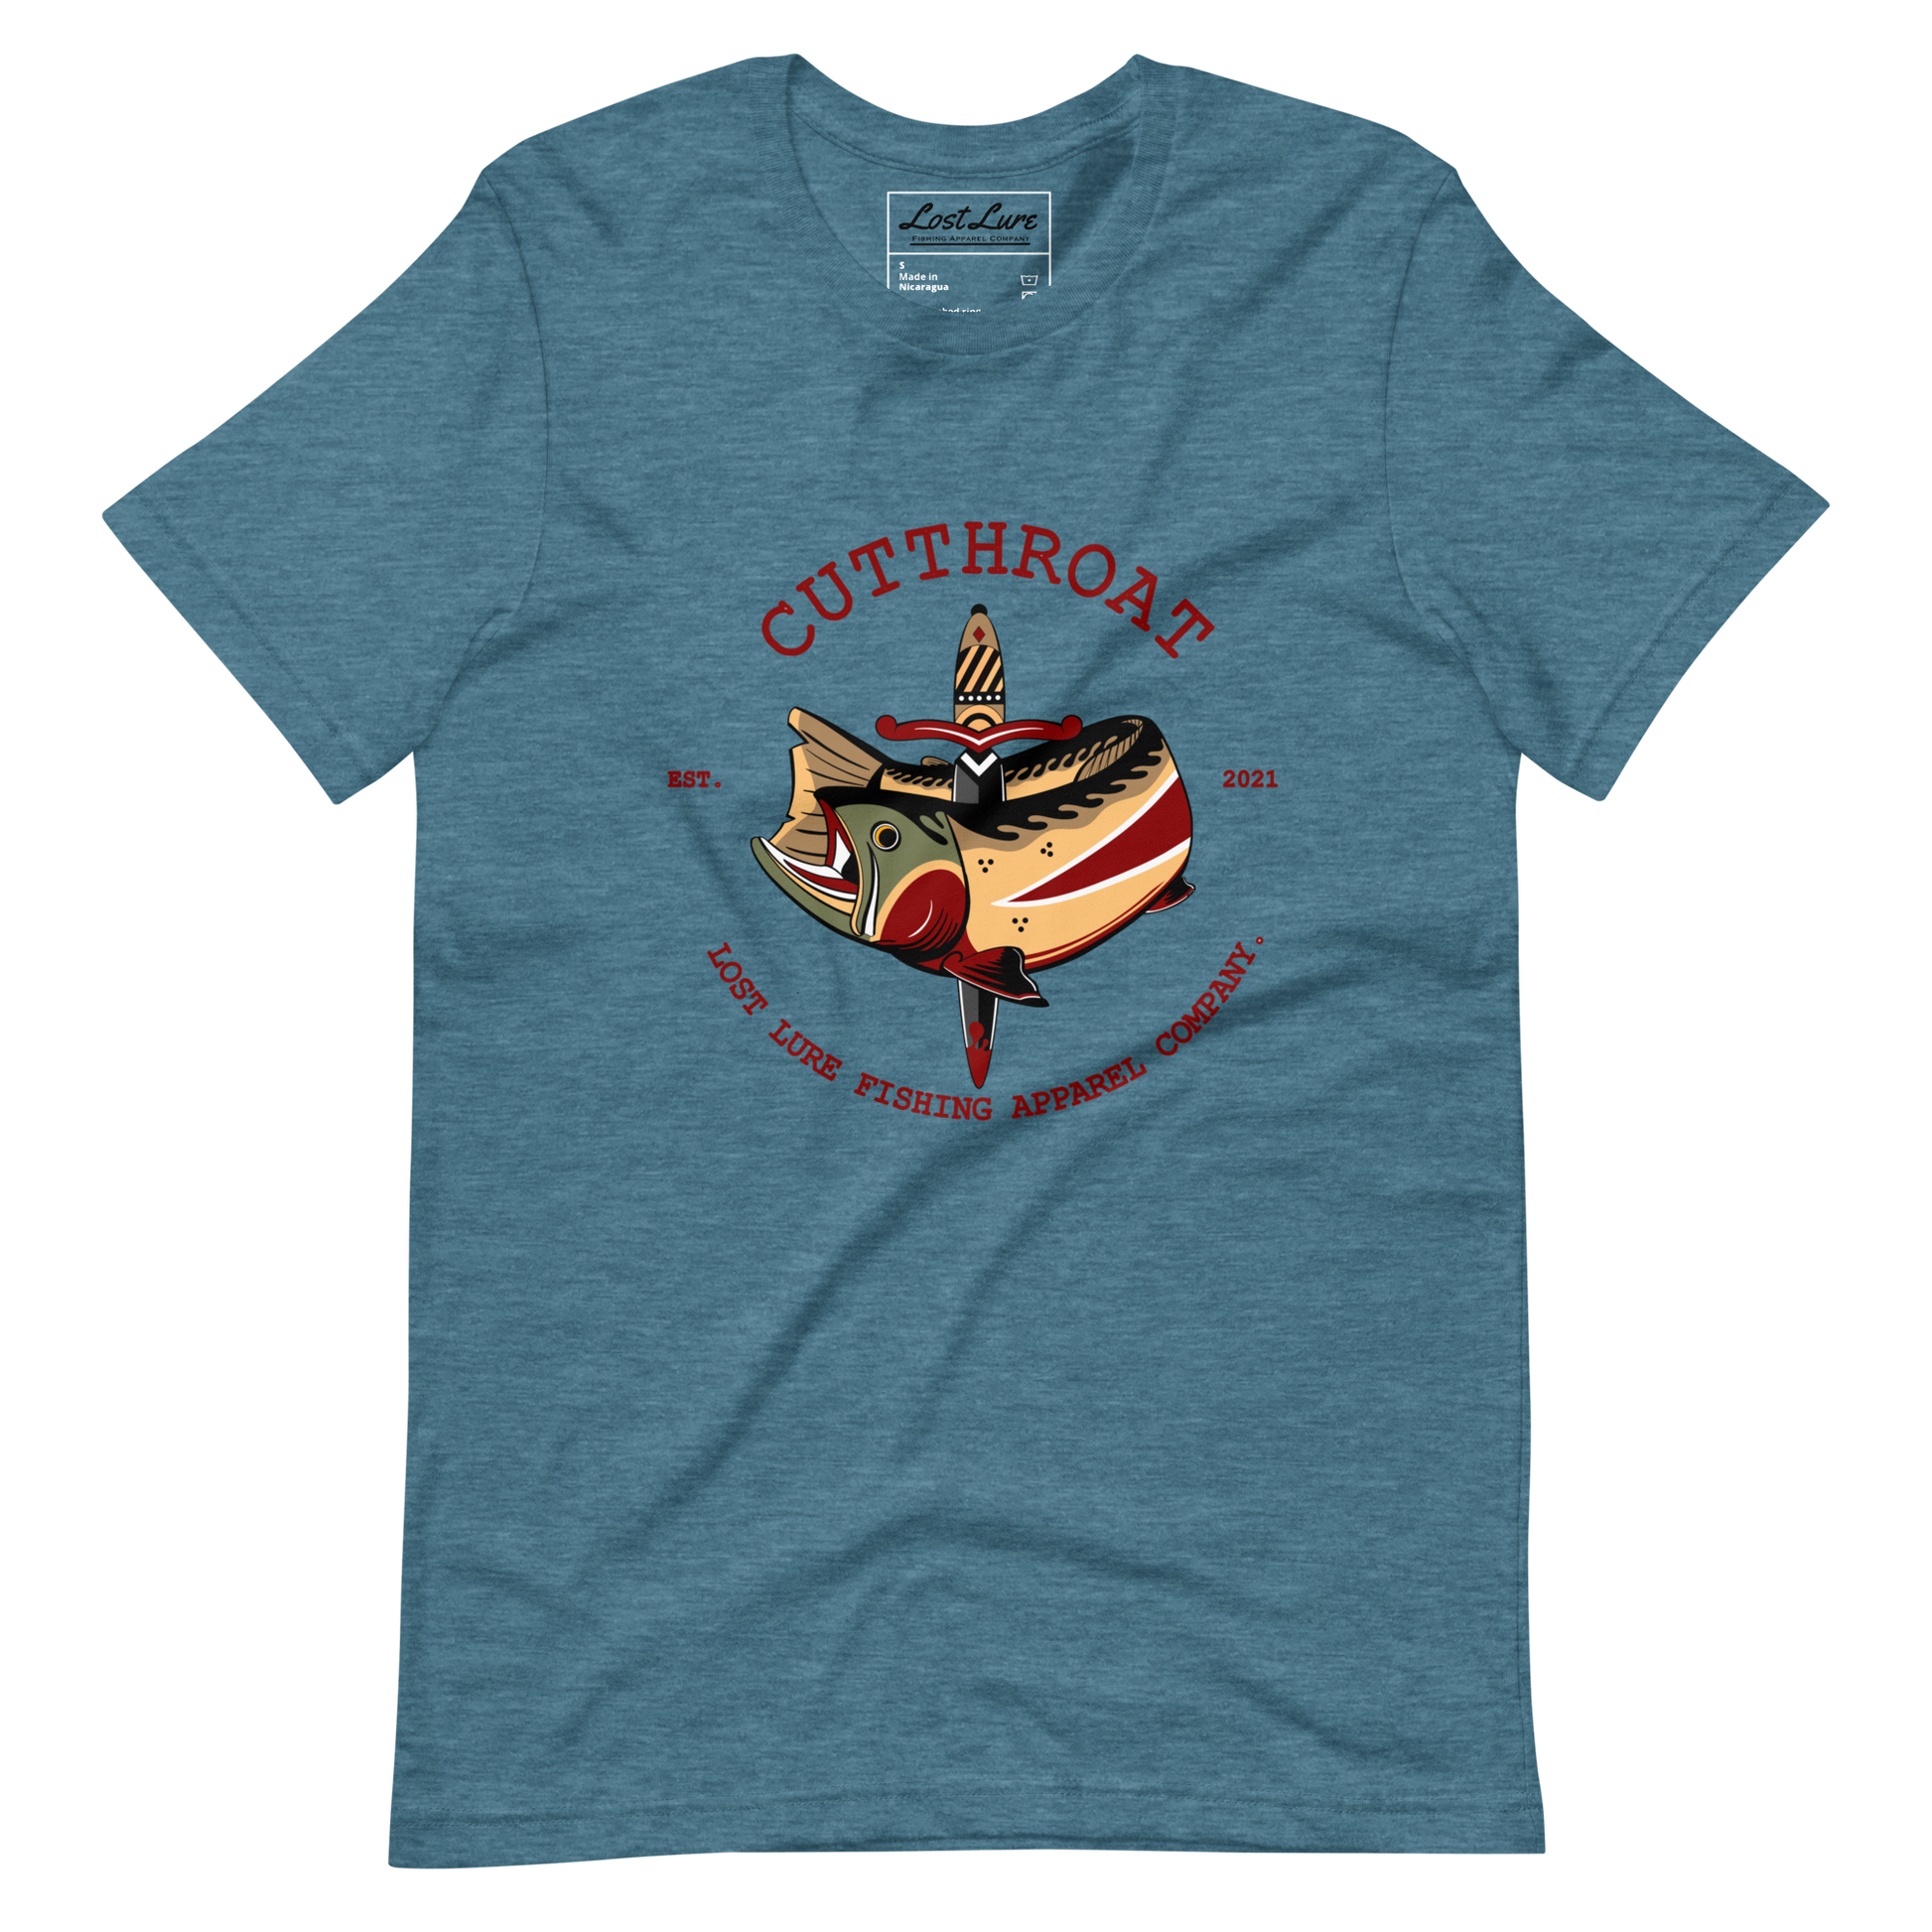 Cutthroat Trout fishing shirt. It’s an American traditional style design with a cutthroat trout and a dagger. The shirt reads Cutthroat trout, est. 2021, lost lure fishing apparel company. The fishing design is on the front of the shirt. Blue fishing shirt, front side